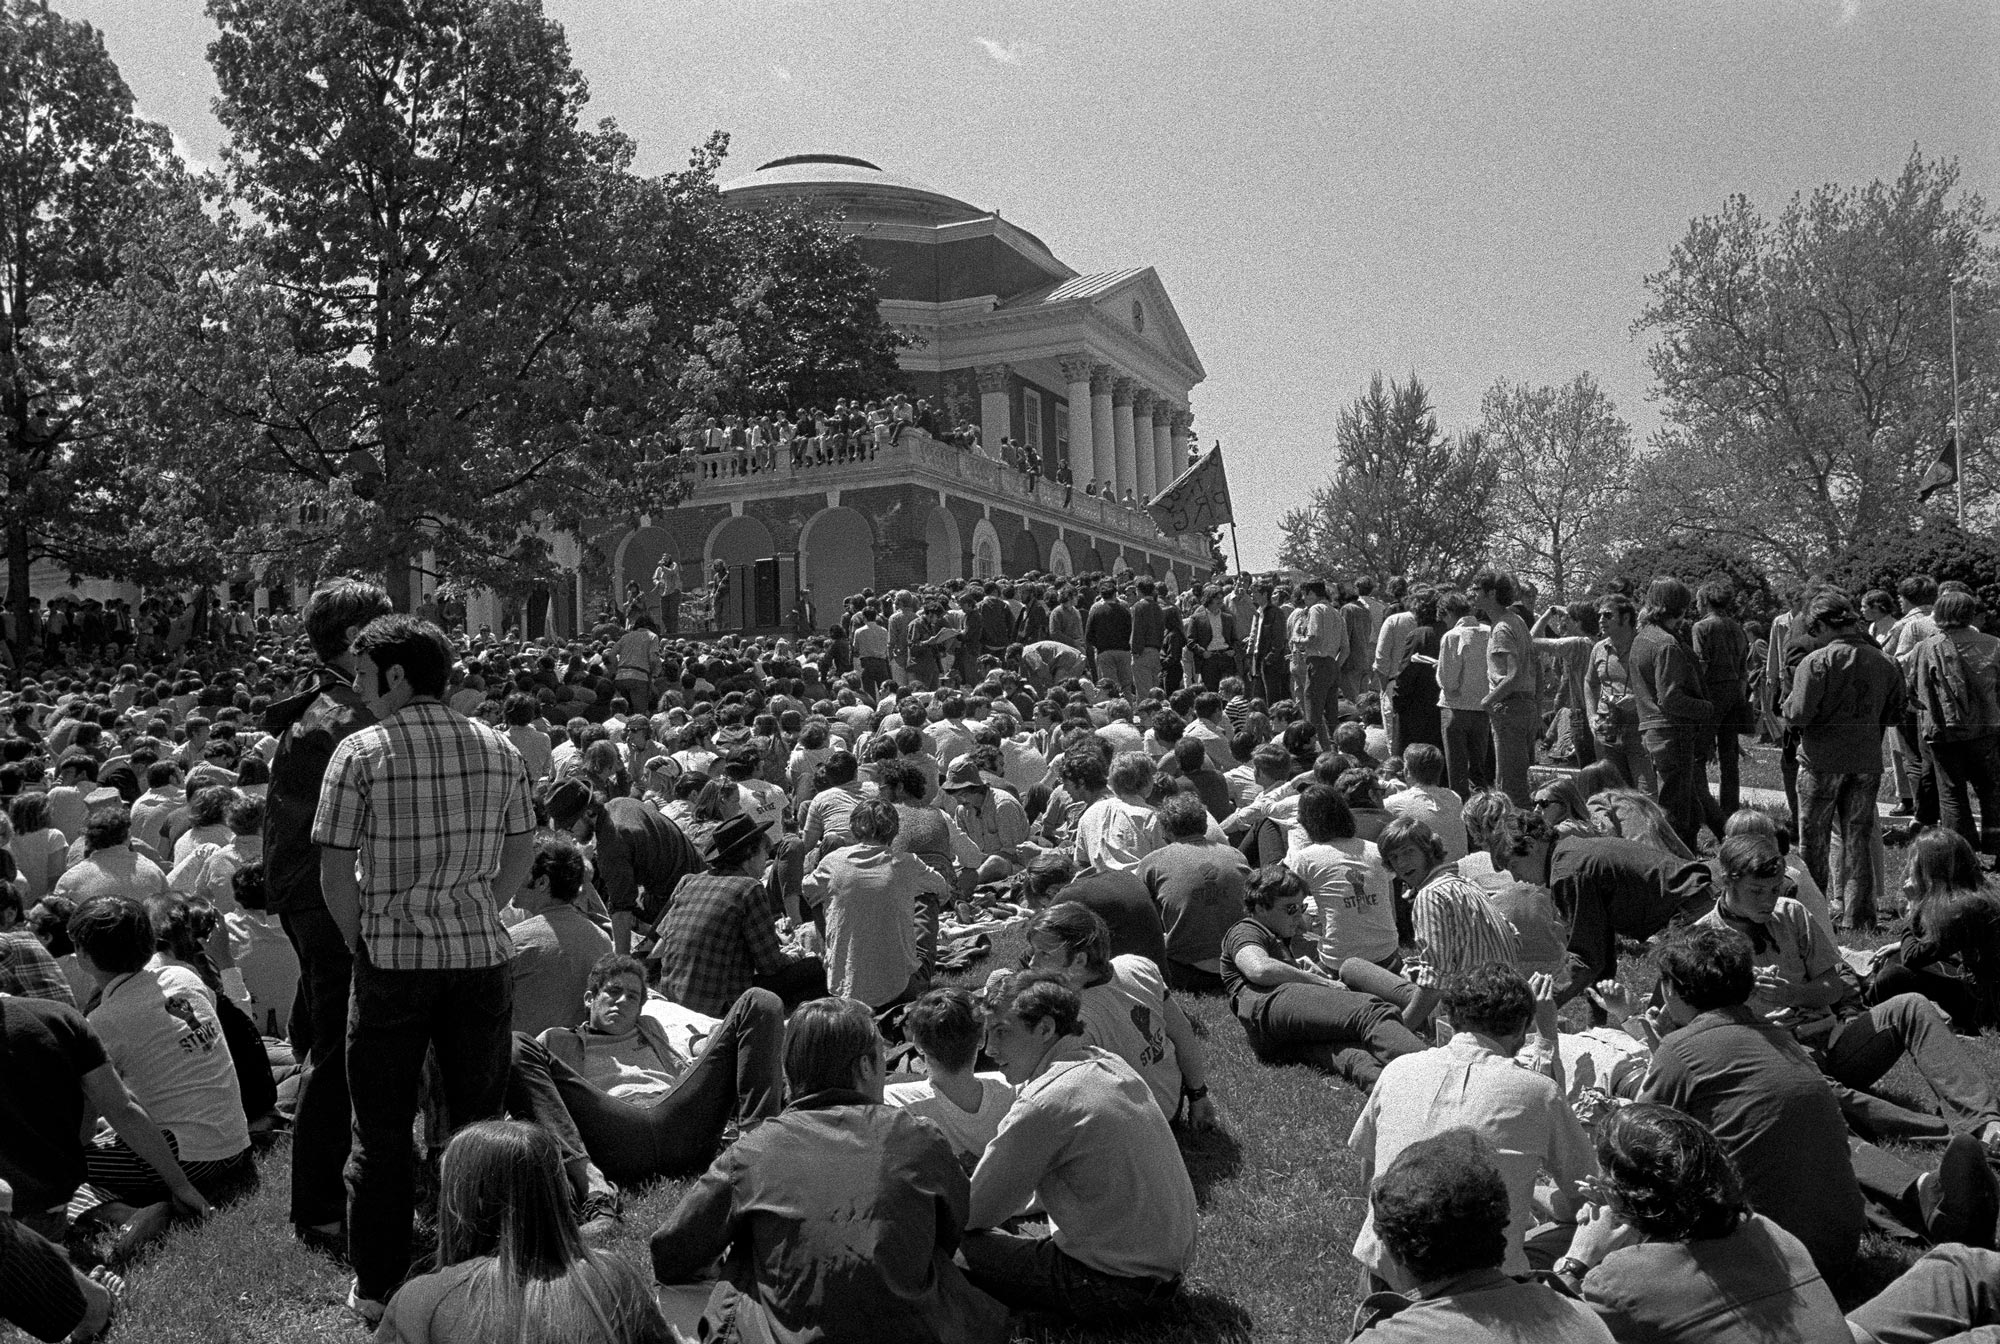 Black and white image of 3000 protestors sitting and standing in front of the Rotunda